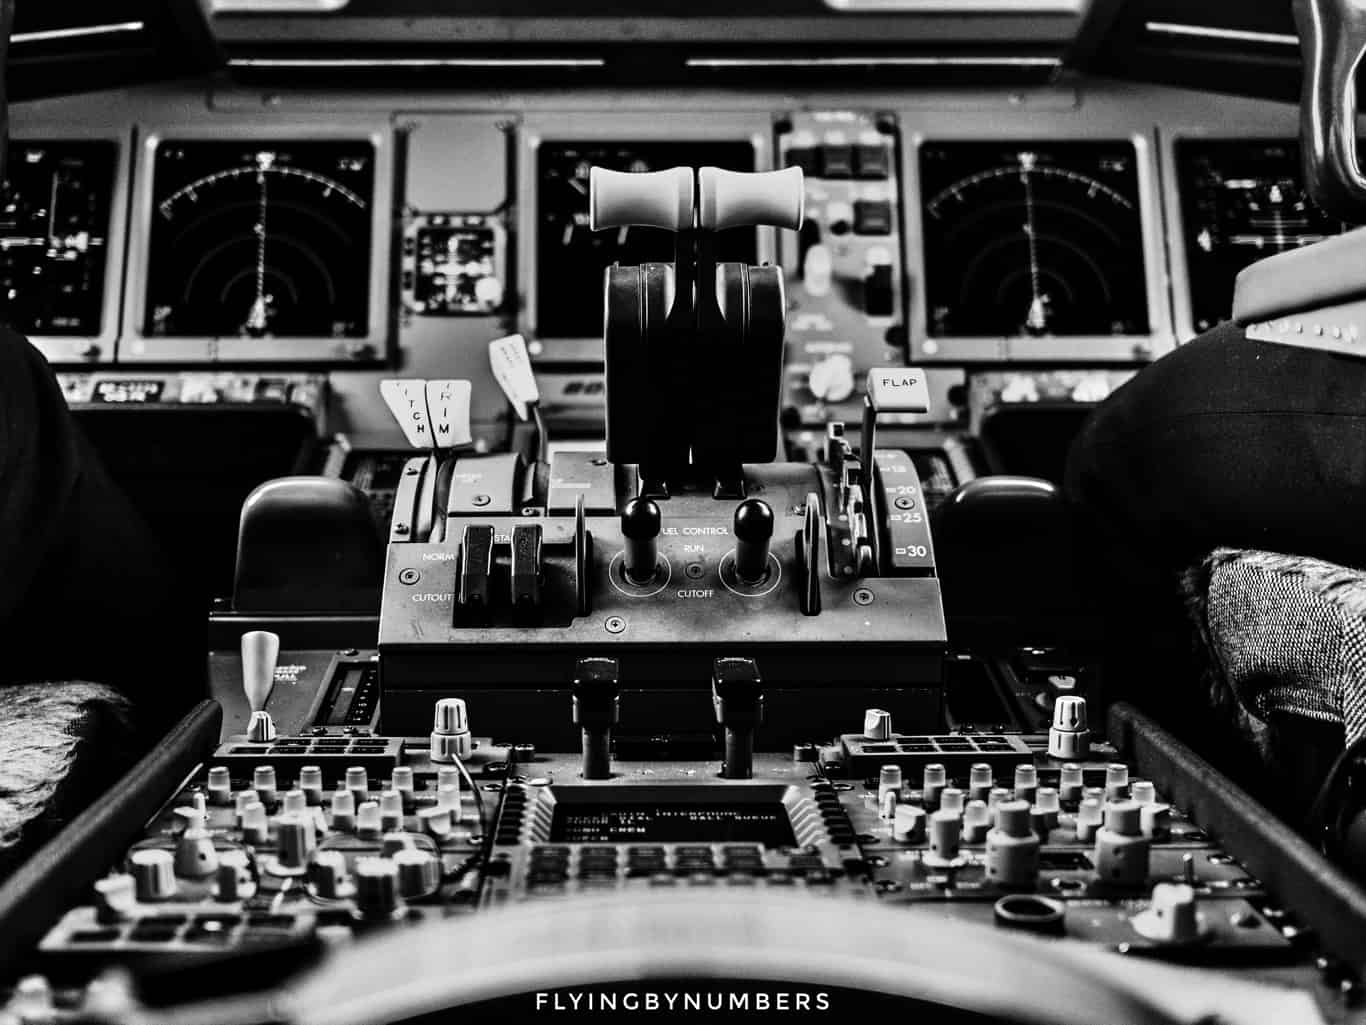 Commercial aircraft flight controls used by captains and co-pilots